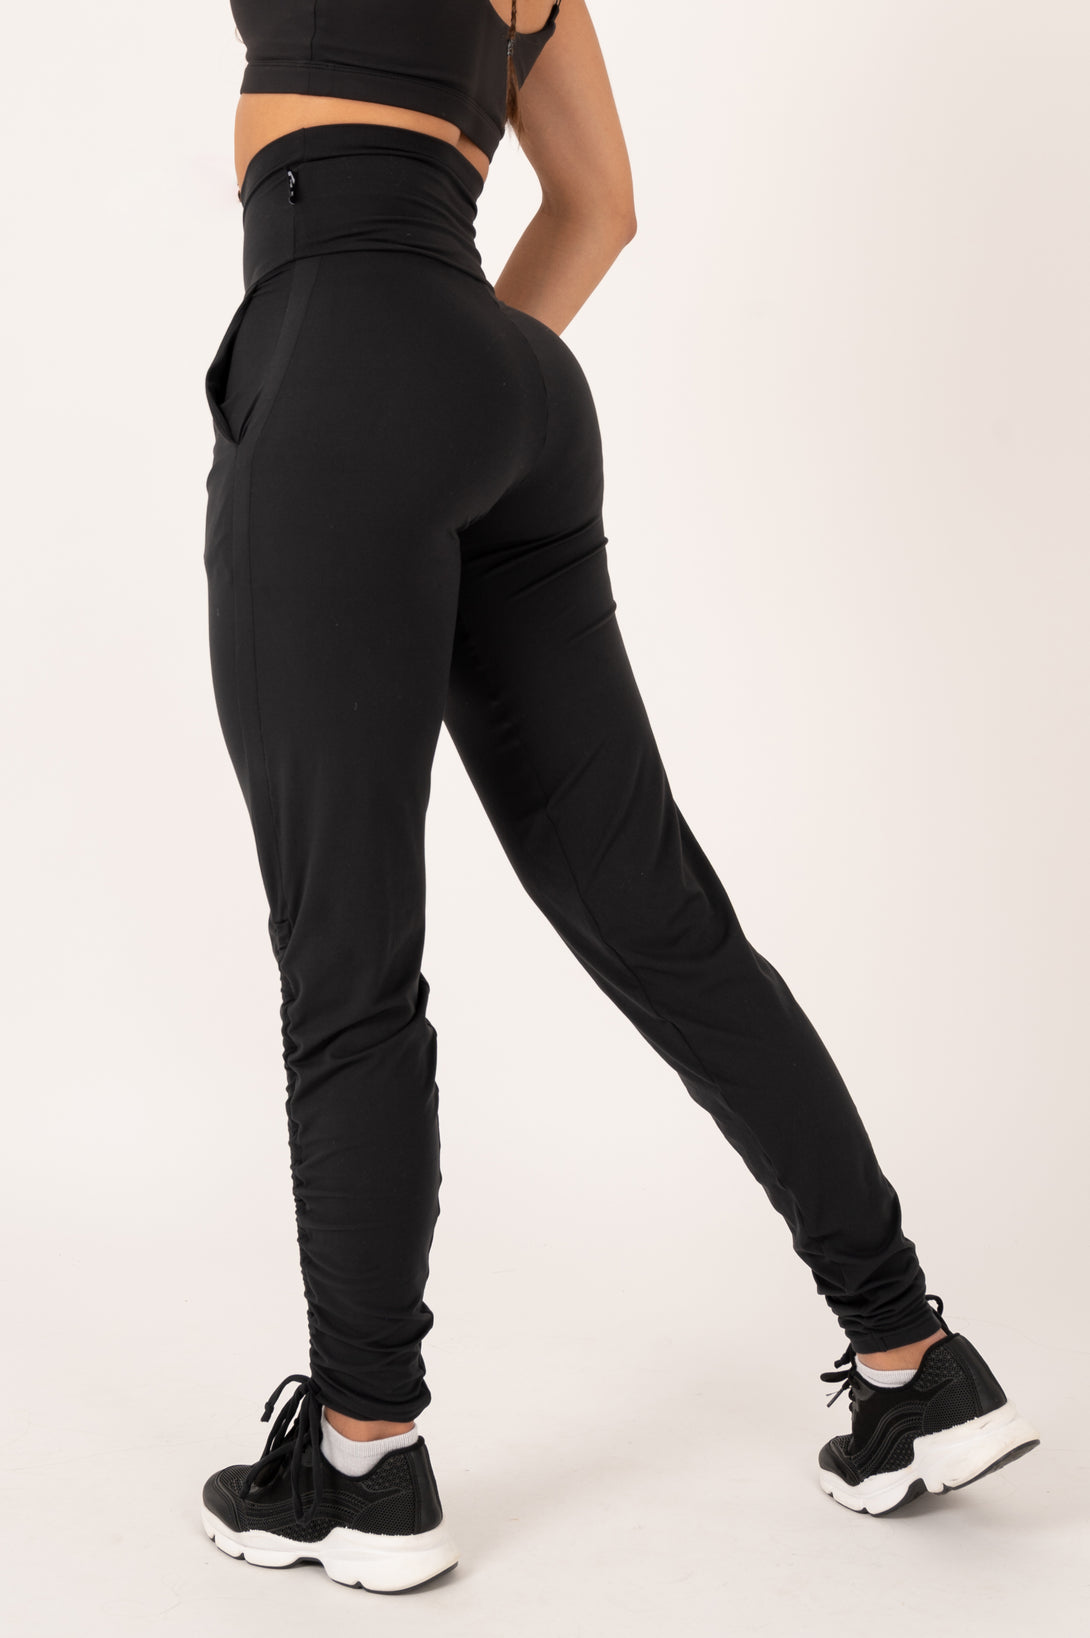 Black Soft To Touch - Jogger Long Tie Sided w/ Pockets - Exoticathletica